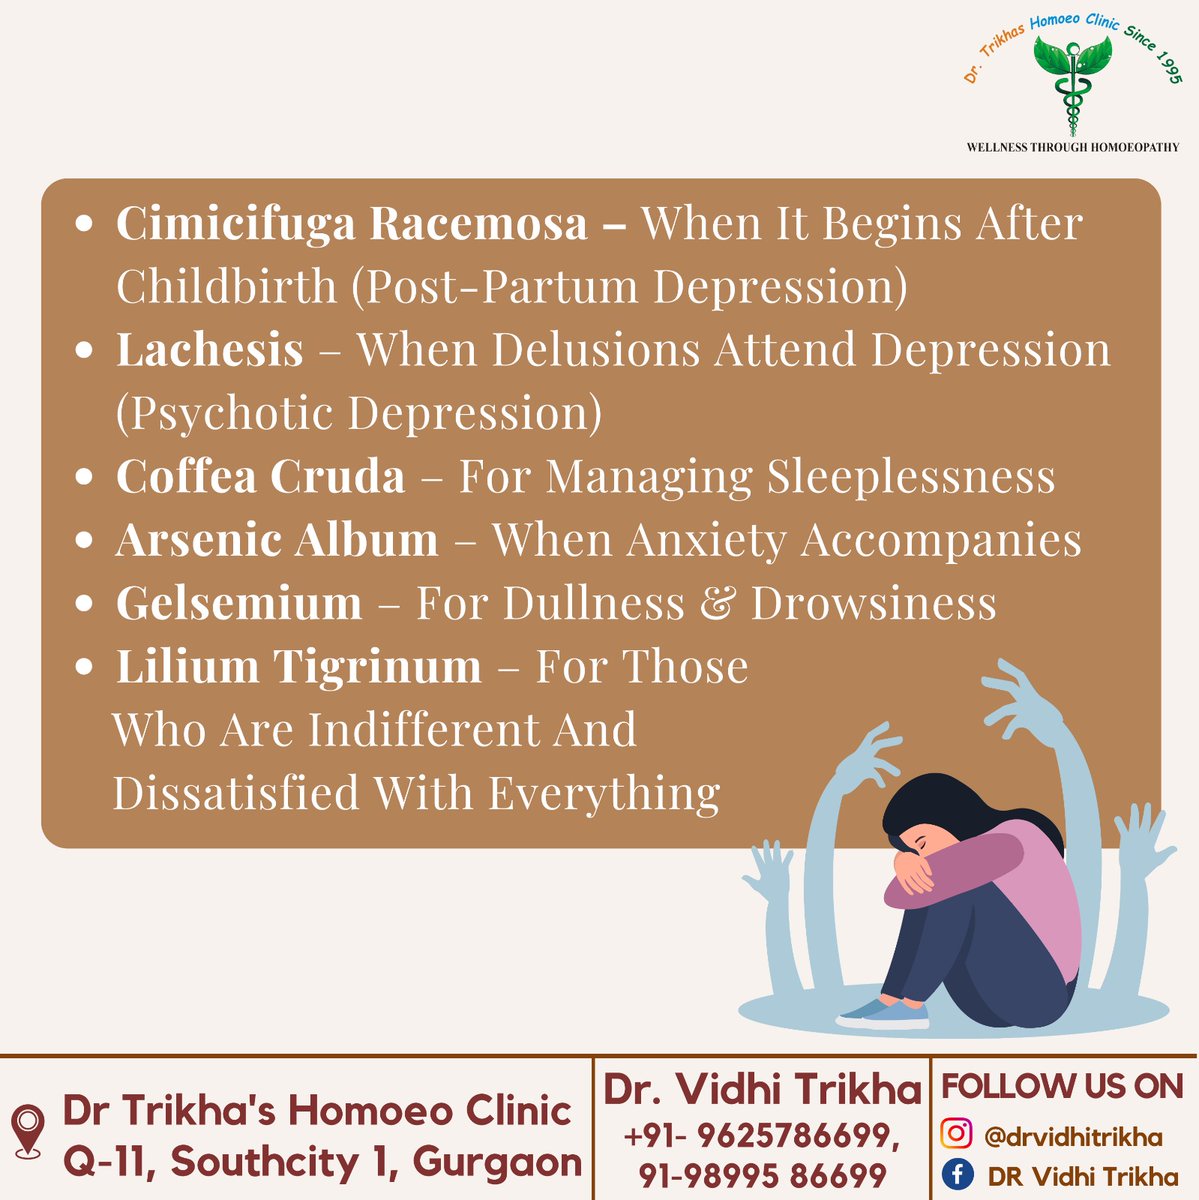 Best Homeopathic Remedies for Depression. . . . #DepressionAndAnxietyAwareness #depression #homeopathy #homeopathyremedies #depressionshilfe #homeopathicremedies #homeopathic